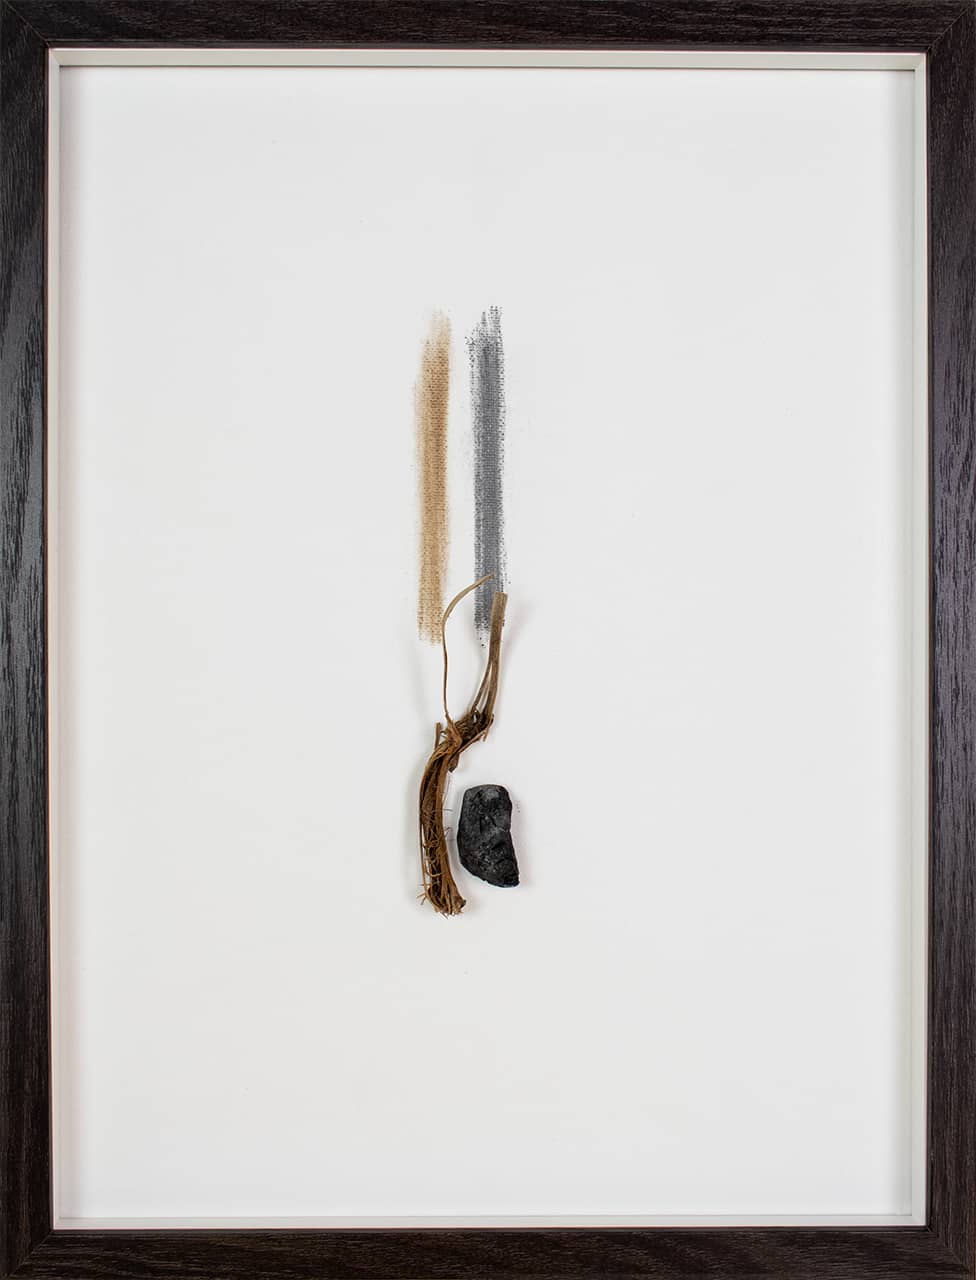 'Untitled' (from the beach), driftwood andnatural pigment on canvas. Artwork by Francesca Virginia Coppola